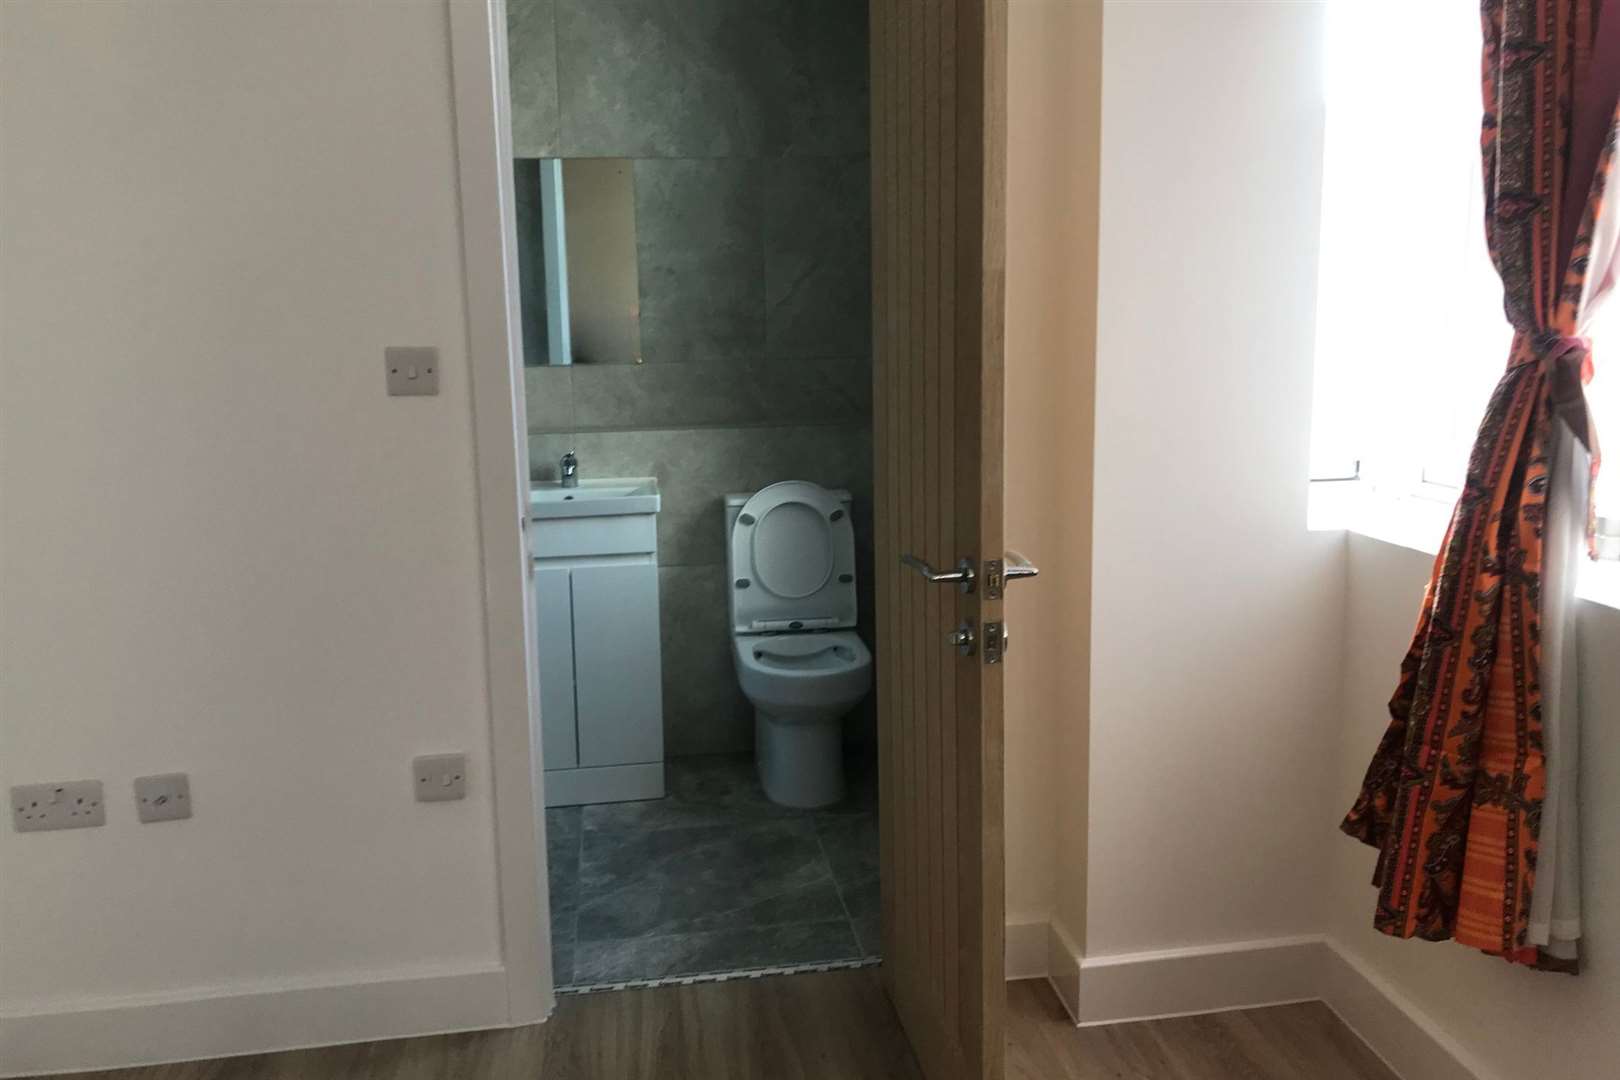 The bathroom in one of the new flats at Anchorage House